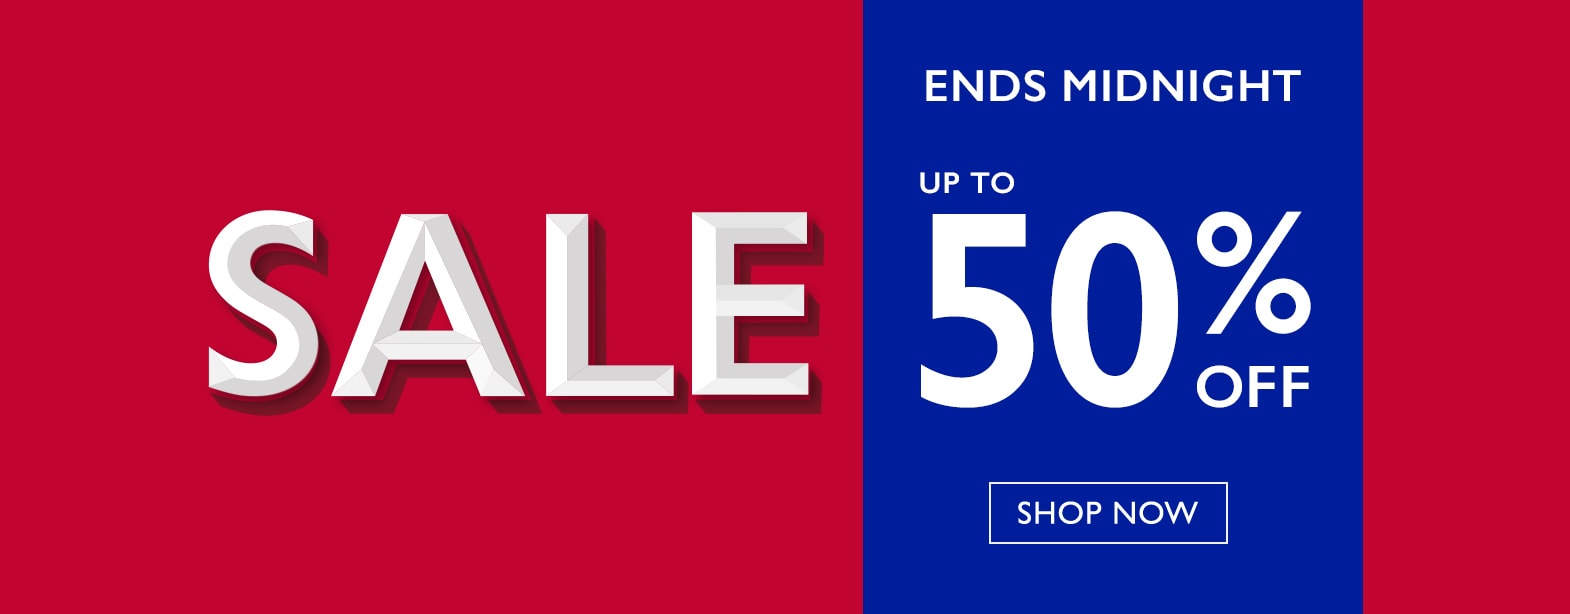 Moss Bros Moss Bros: Sale up to 50% off suits and formal menswear